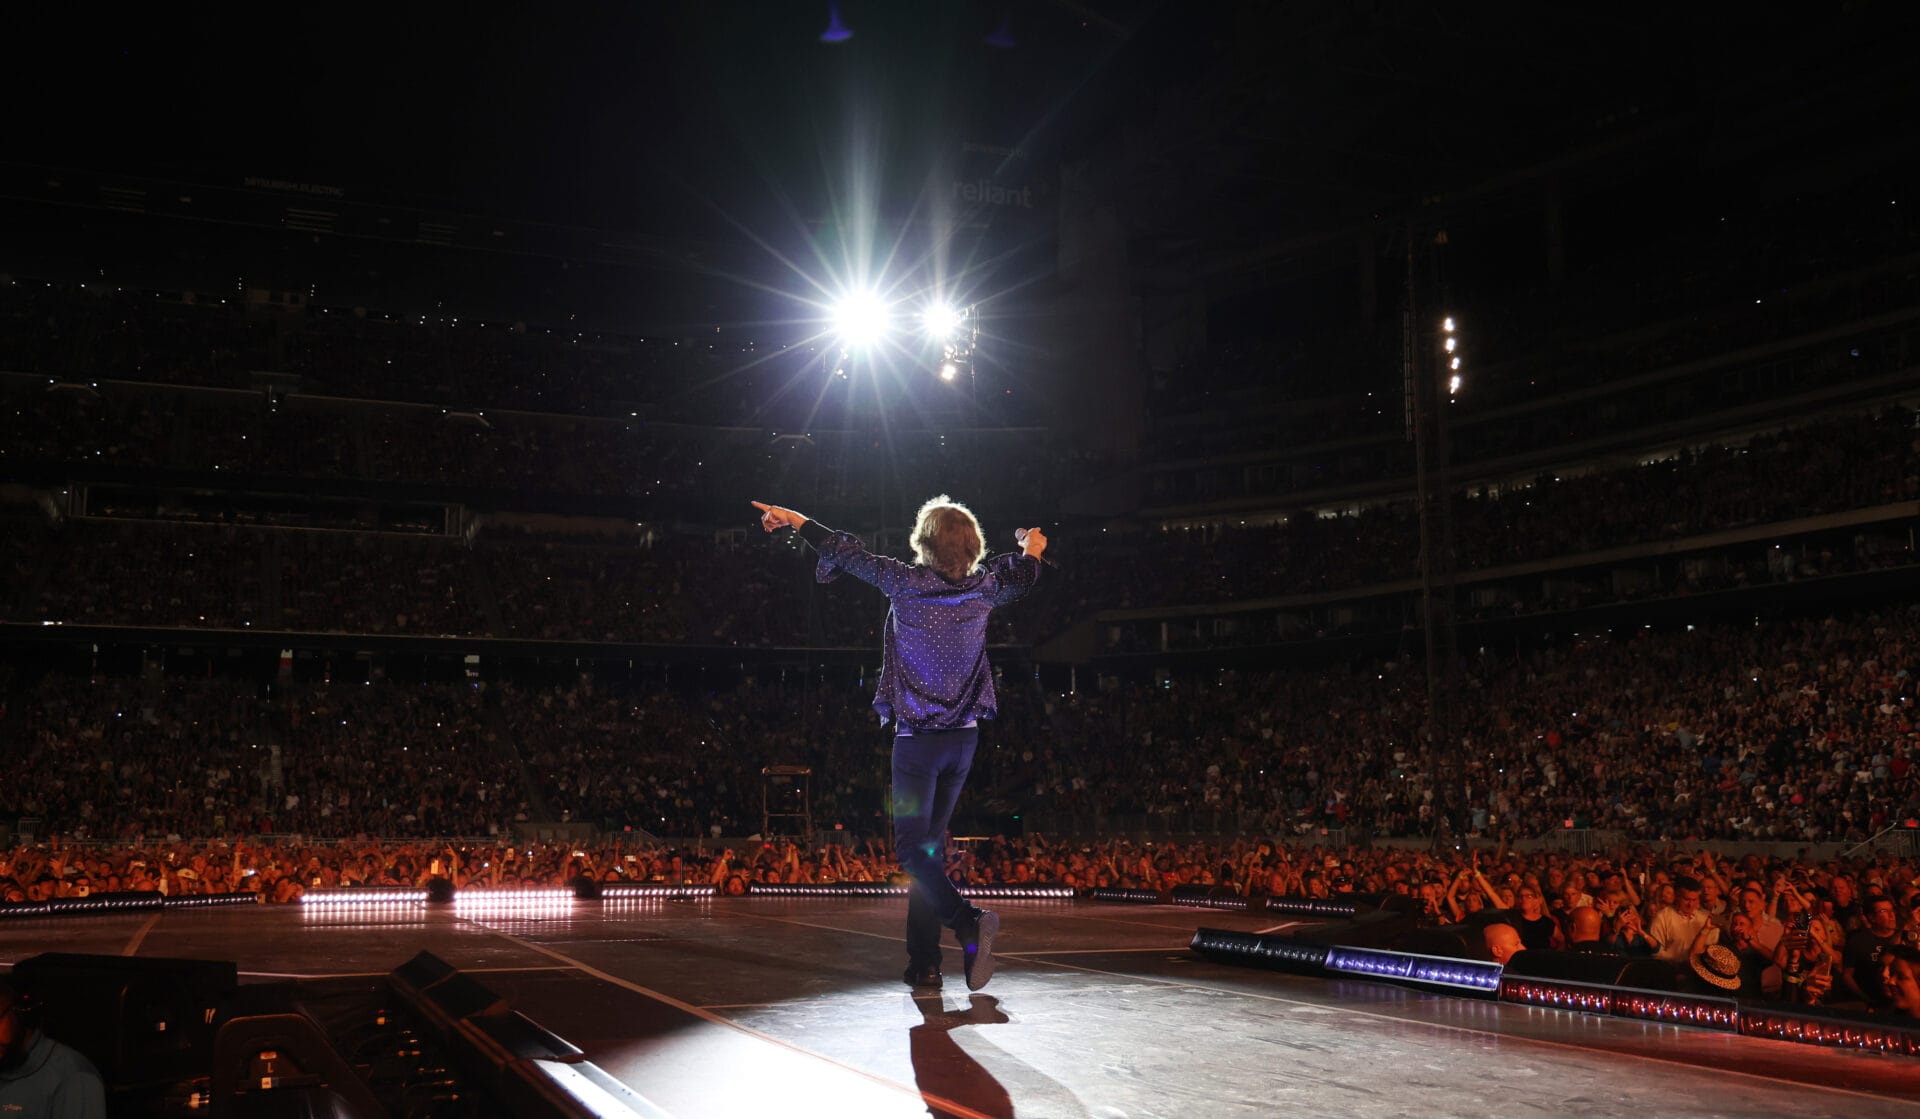 The Rolling Stones Perform First “Emotional Rescue” in 10 Years